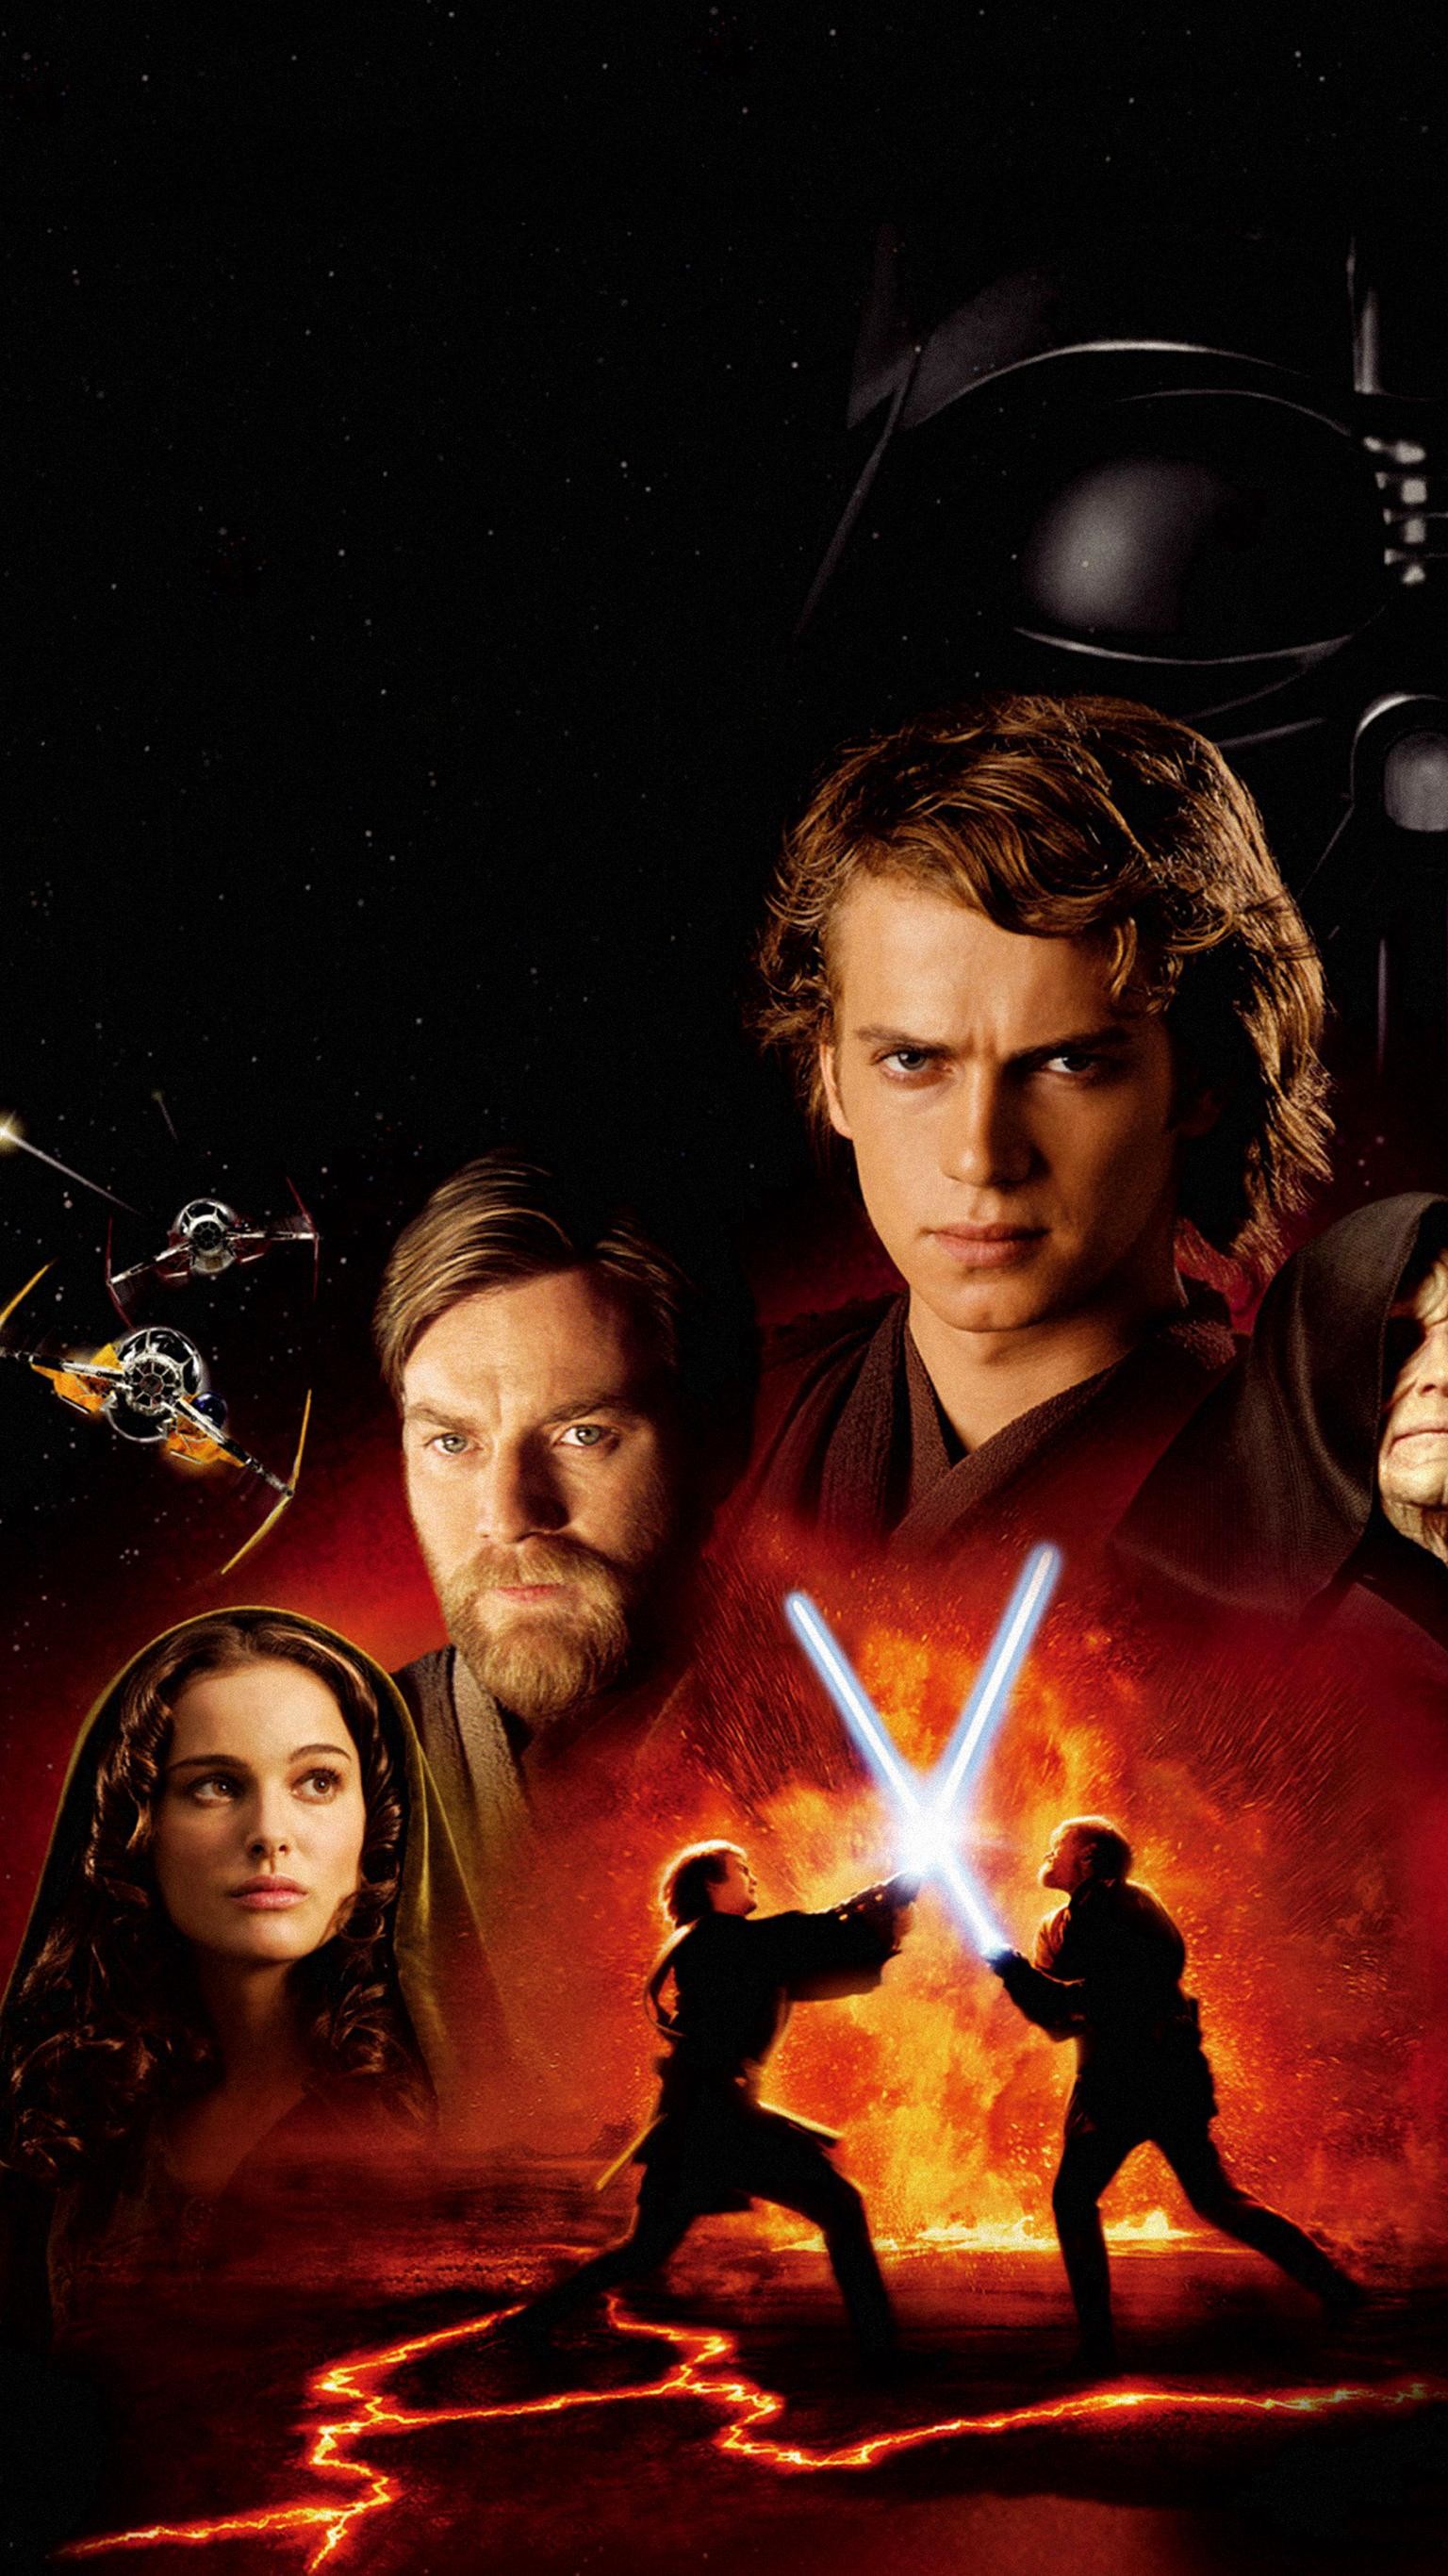 1536x2732 Wallpaper for "Star Wars: Episode III - Revenge of the Sith" (2005